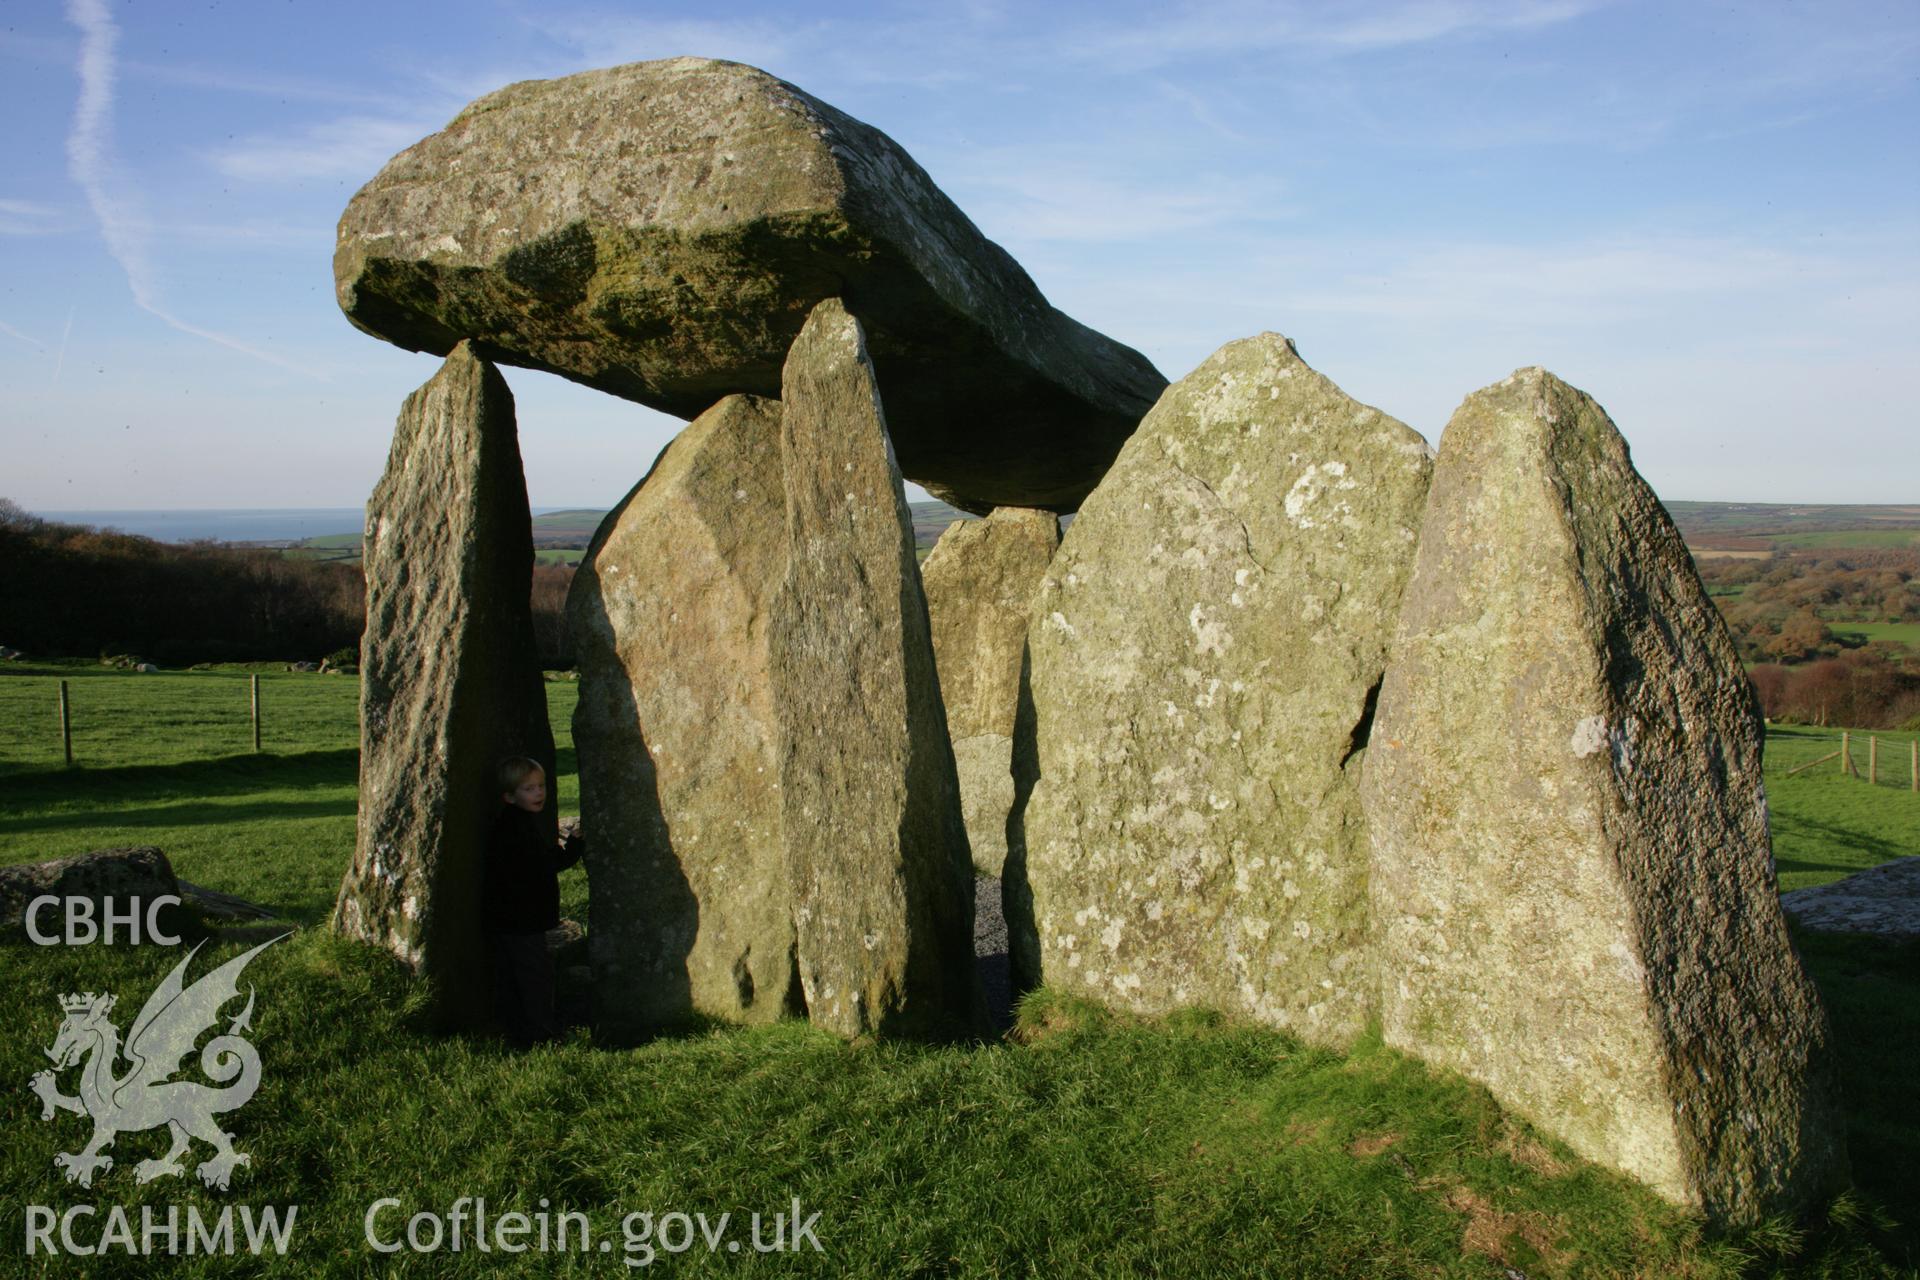 Pentre Ifan chambered tomb at sunset; view of main fa?ade and 'portal' from the south.